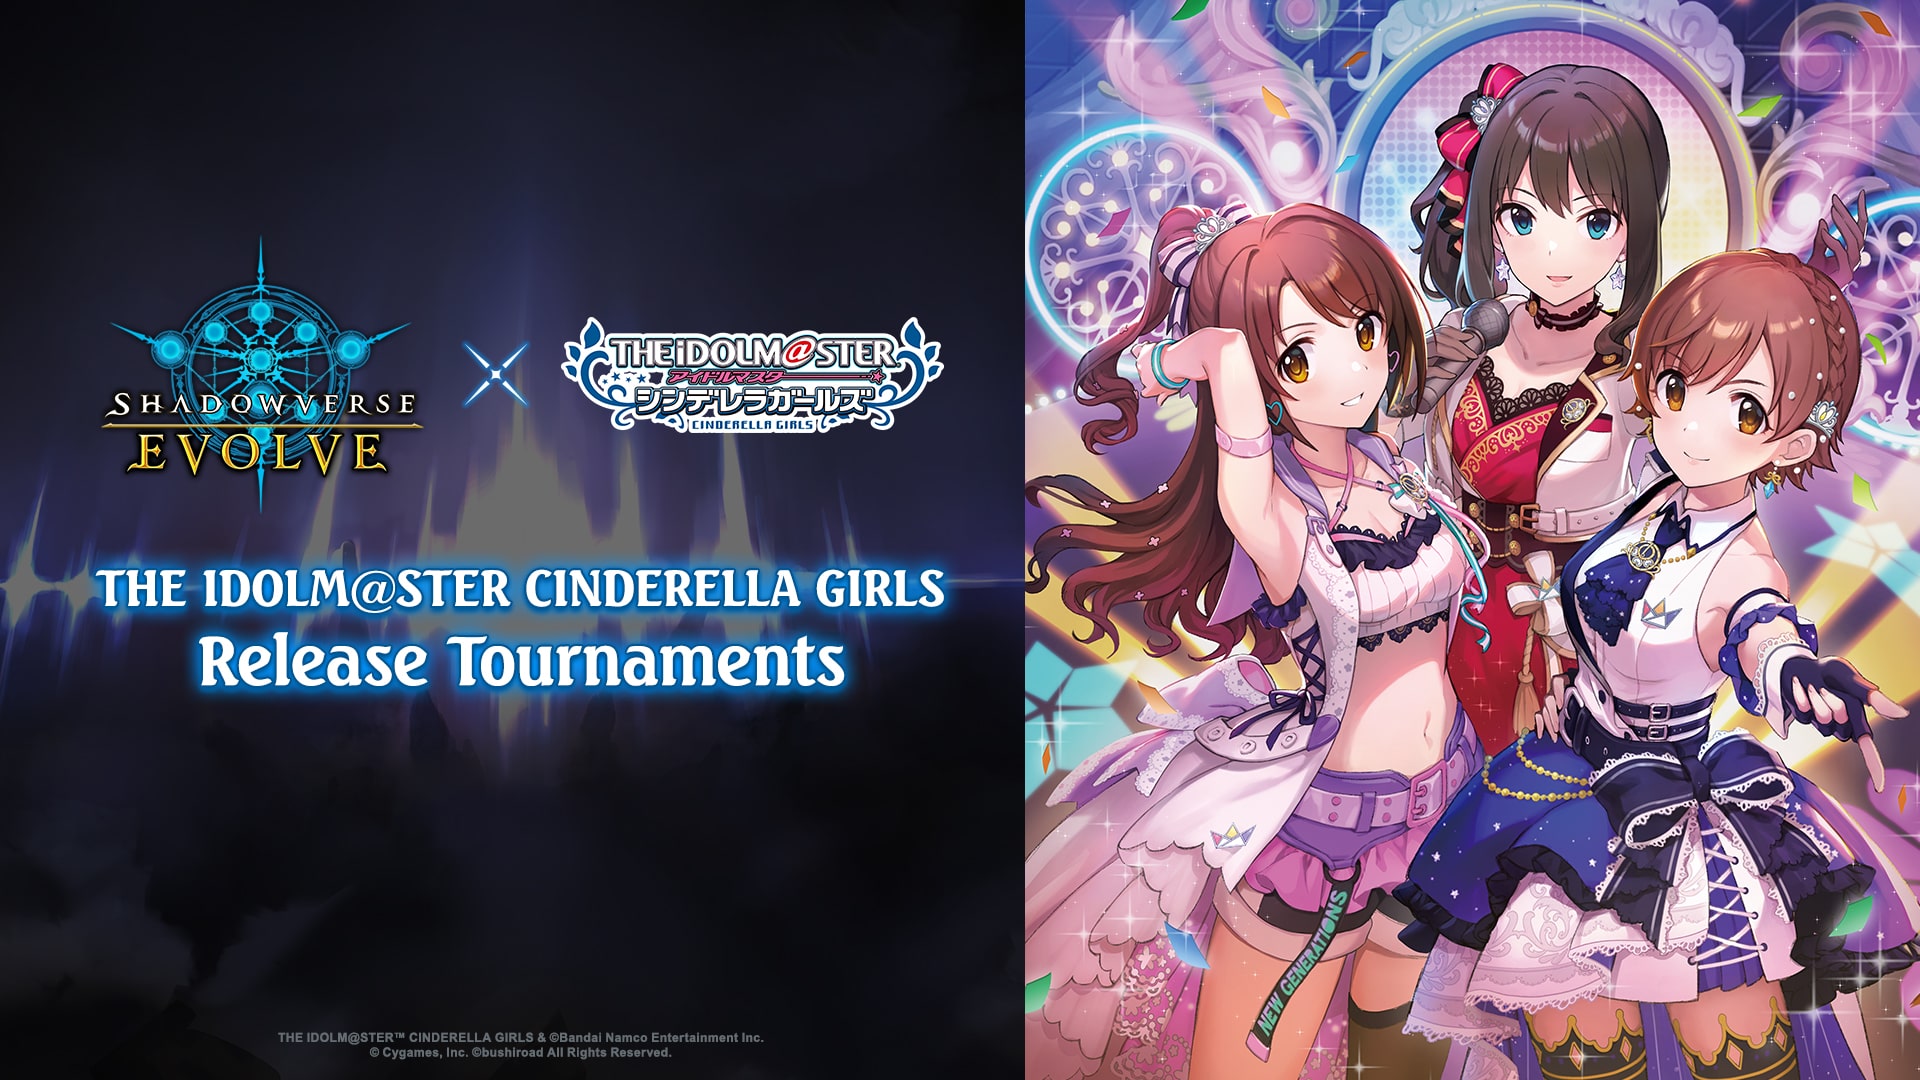 THE IDOLM@STER CINDERELLA GIRLS Release Tournaments